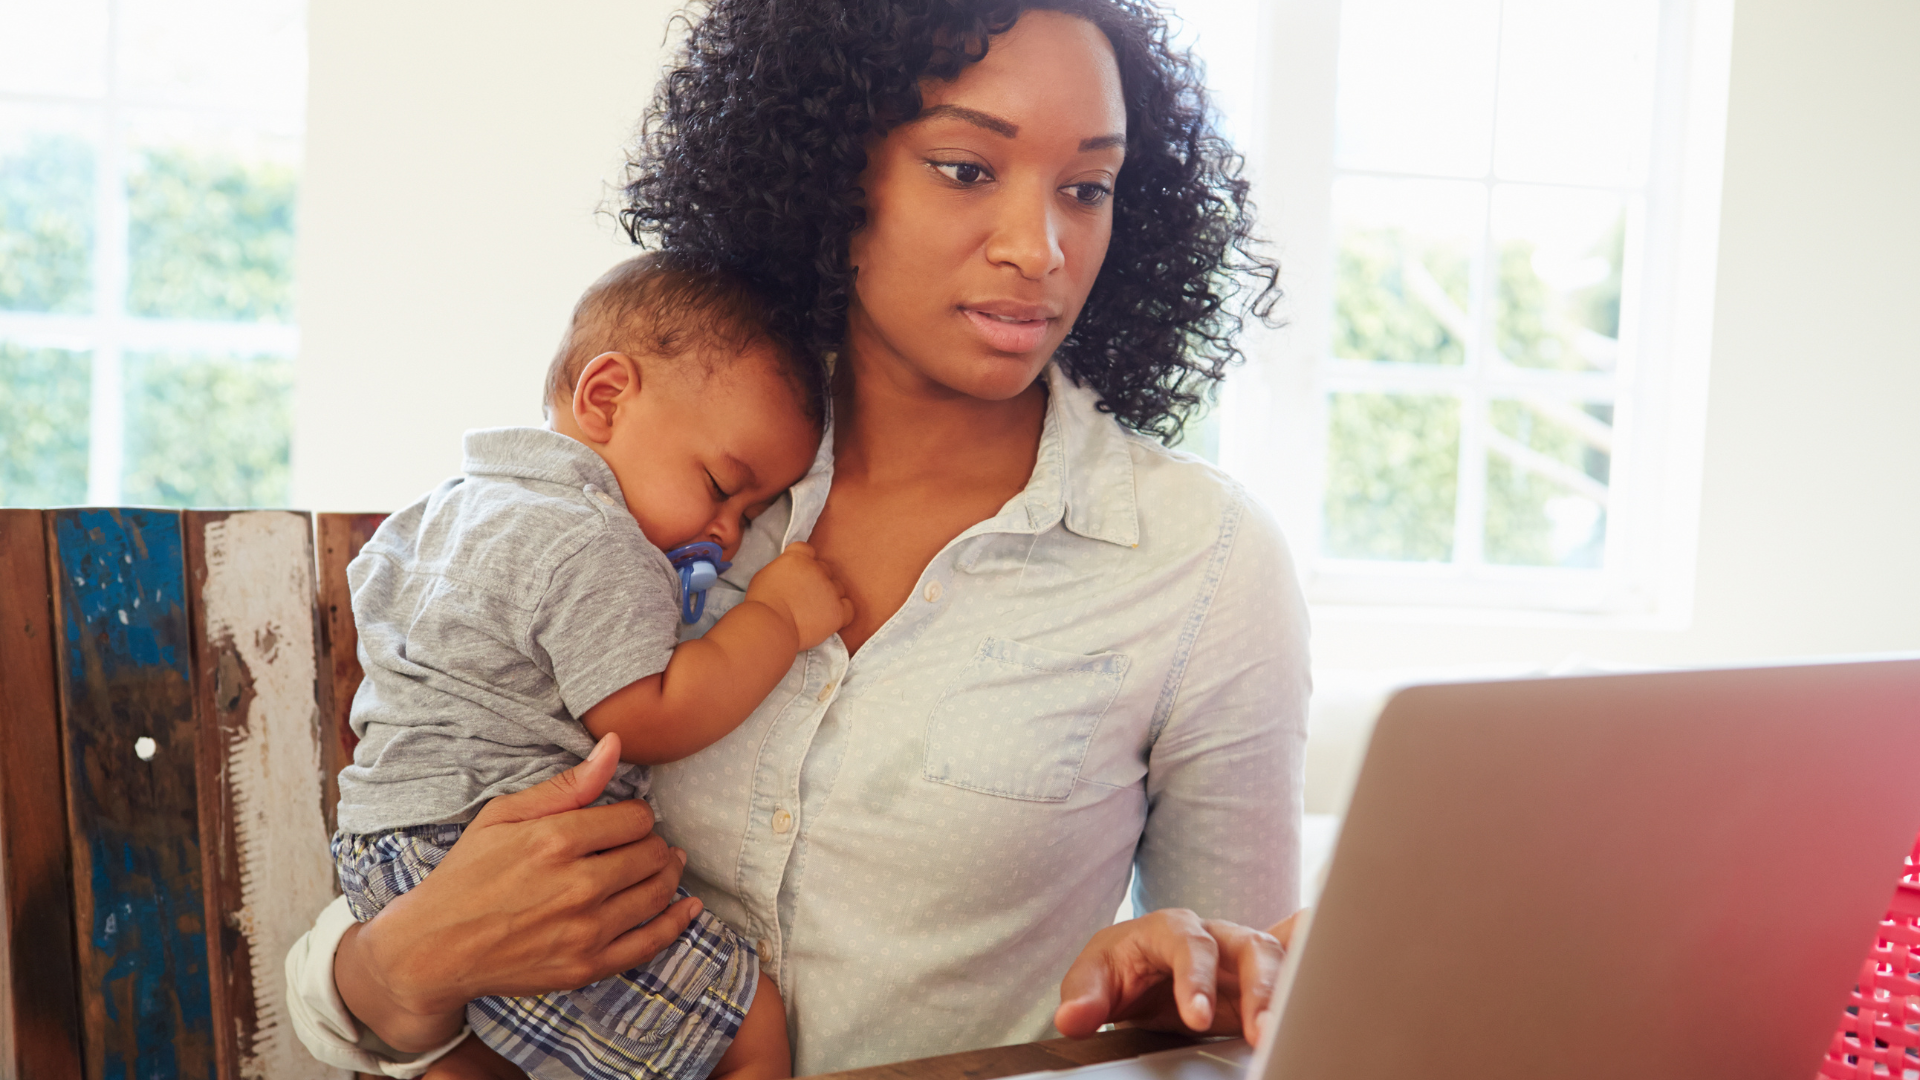 Mothers are natural multitaskers, making them efficient workers